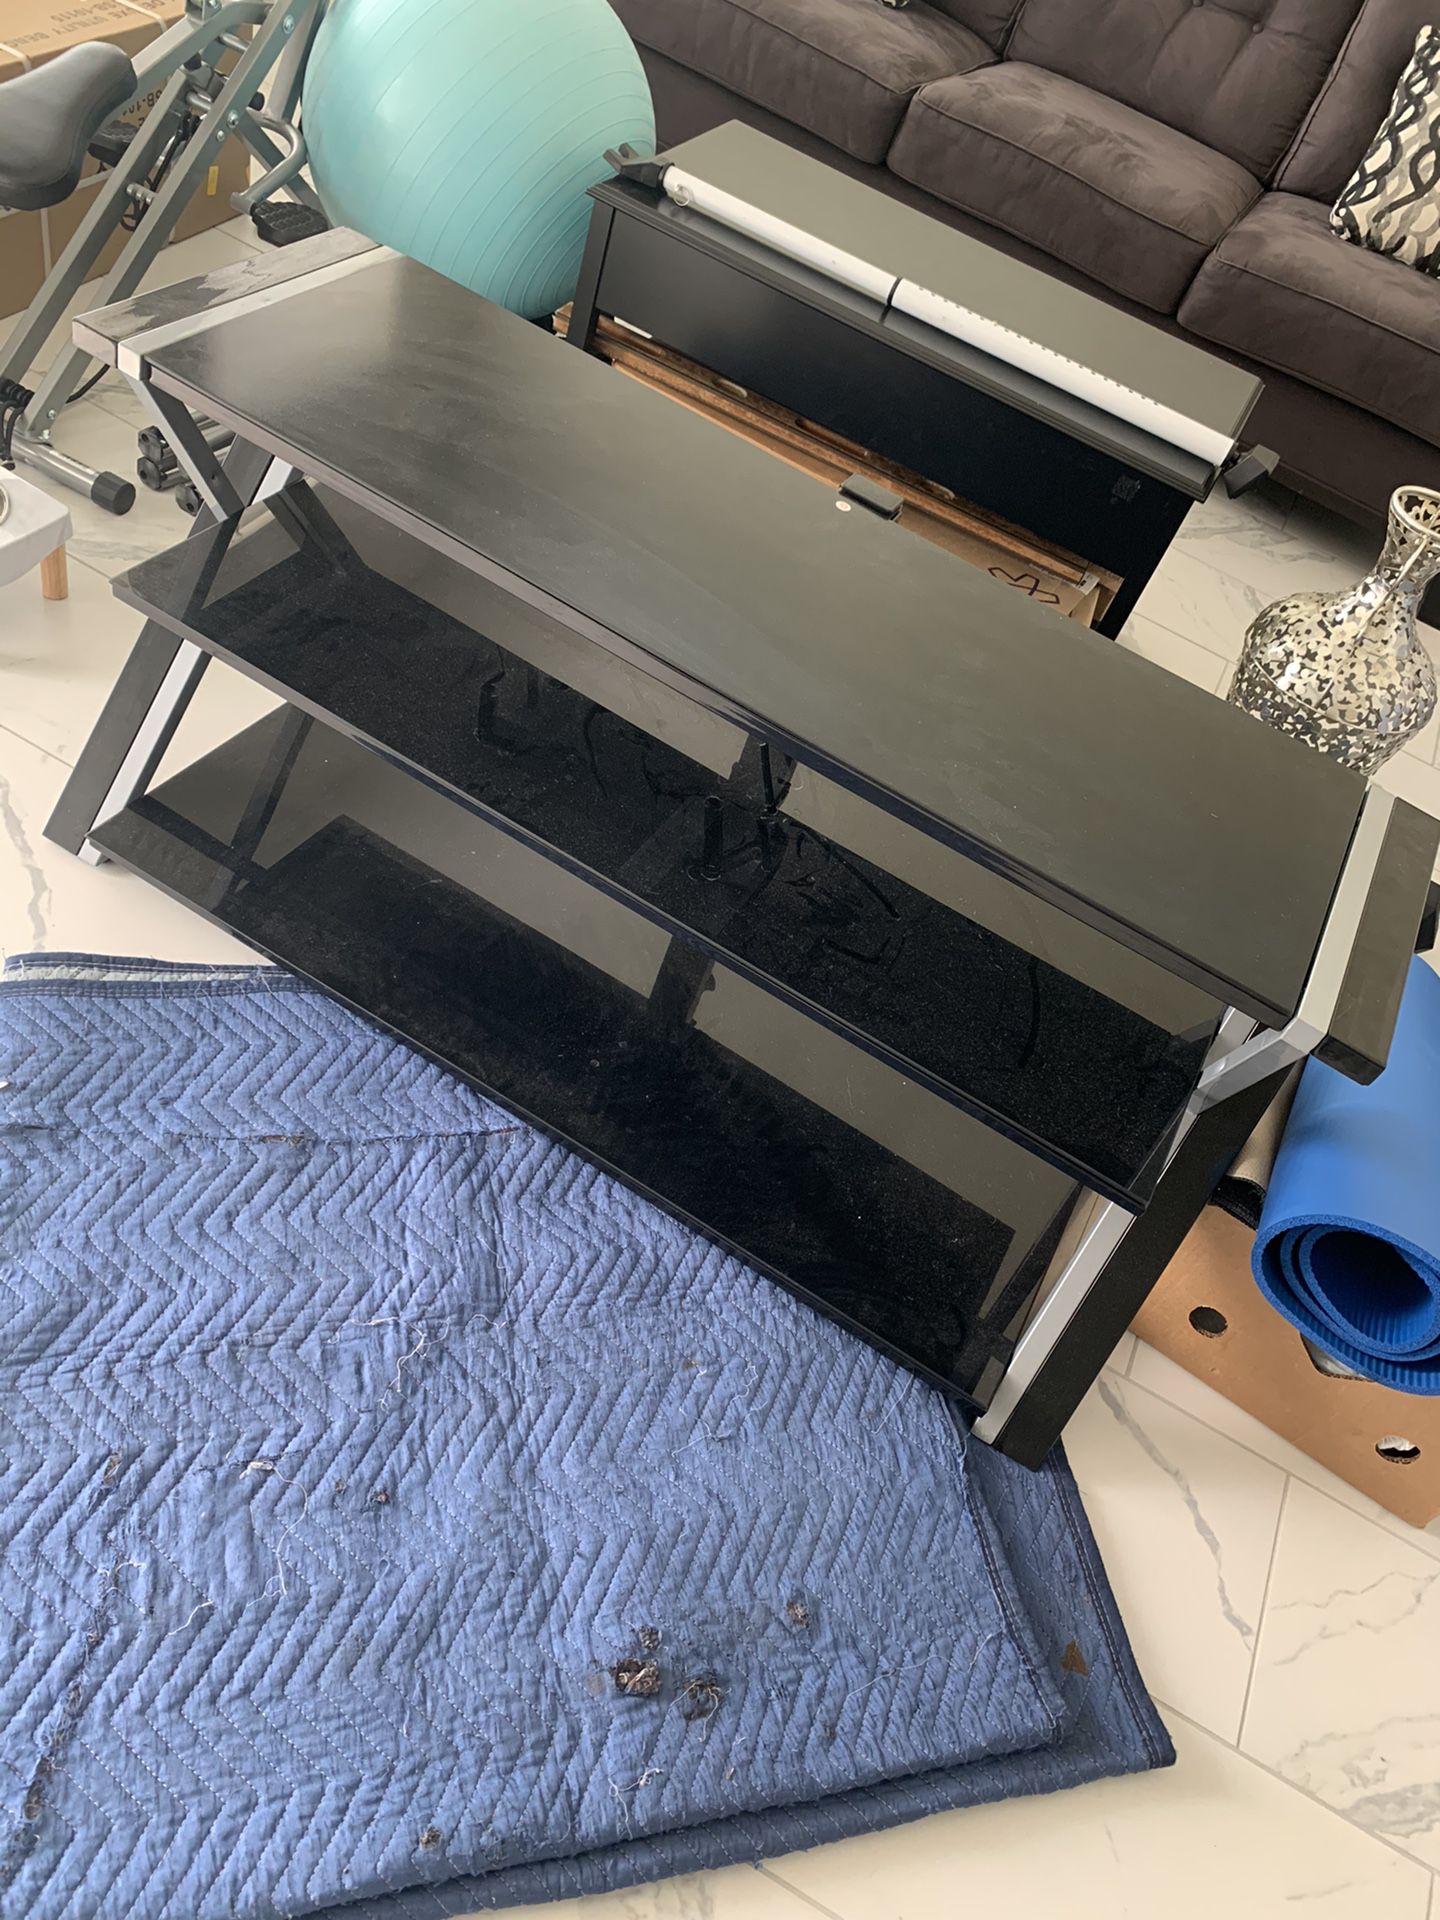 Tv stand ans vase for sale!!!! Today!!!